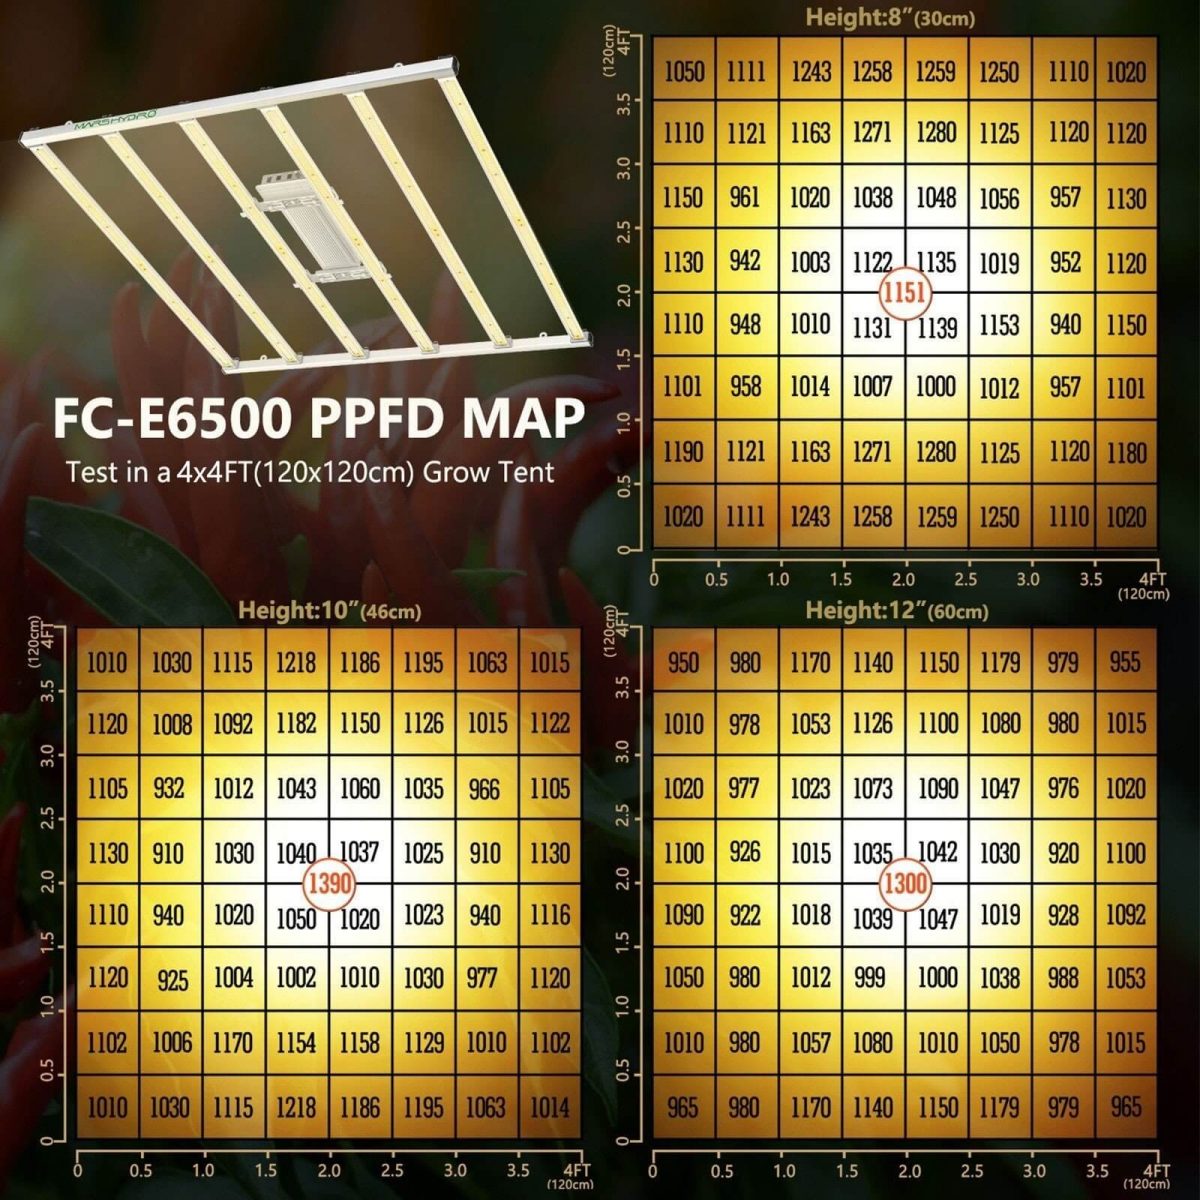 Three PPFD maps of the FC-E6500 LED grow light tested in a 4'x4' grow tent at 8,10,12 inches.